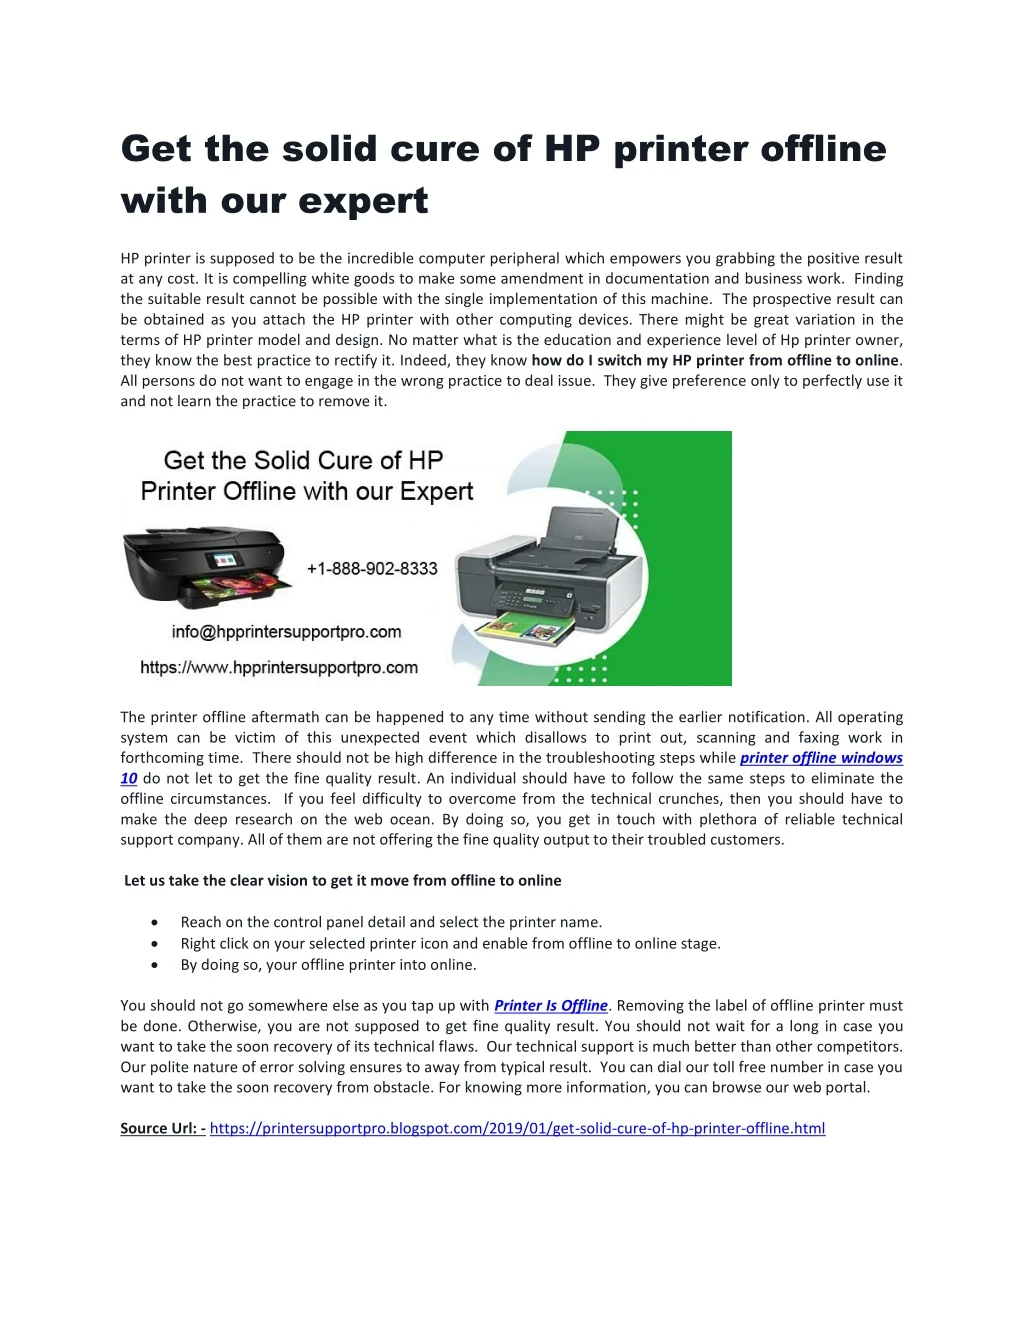 get the solid cure of hp printer offline with